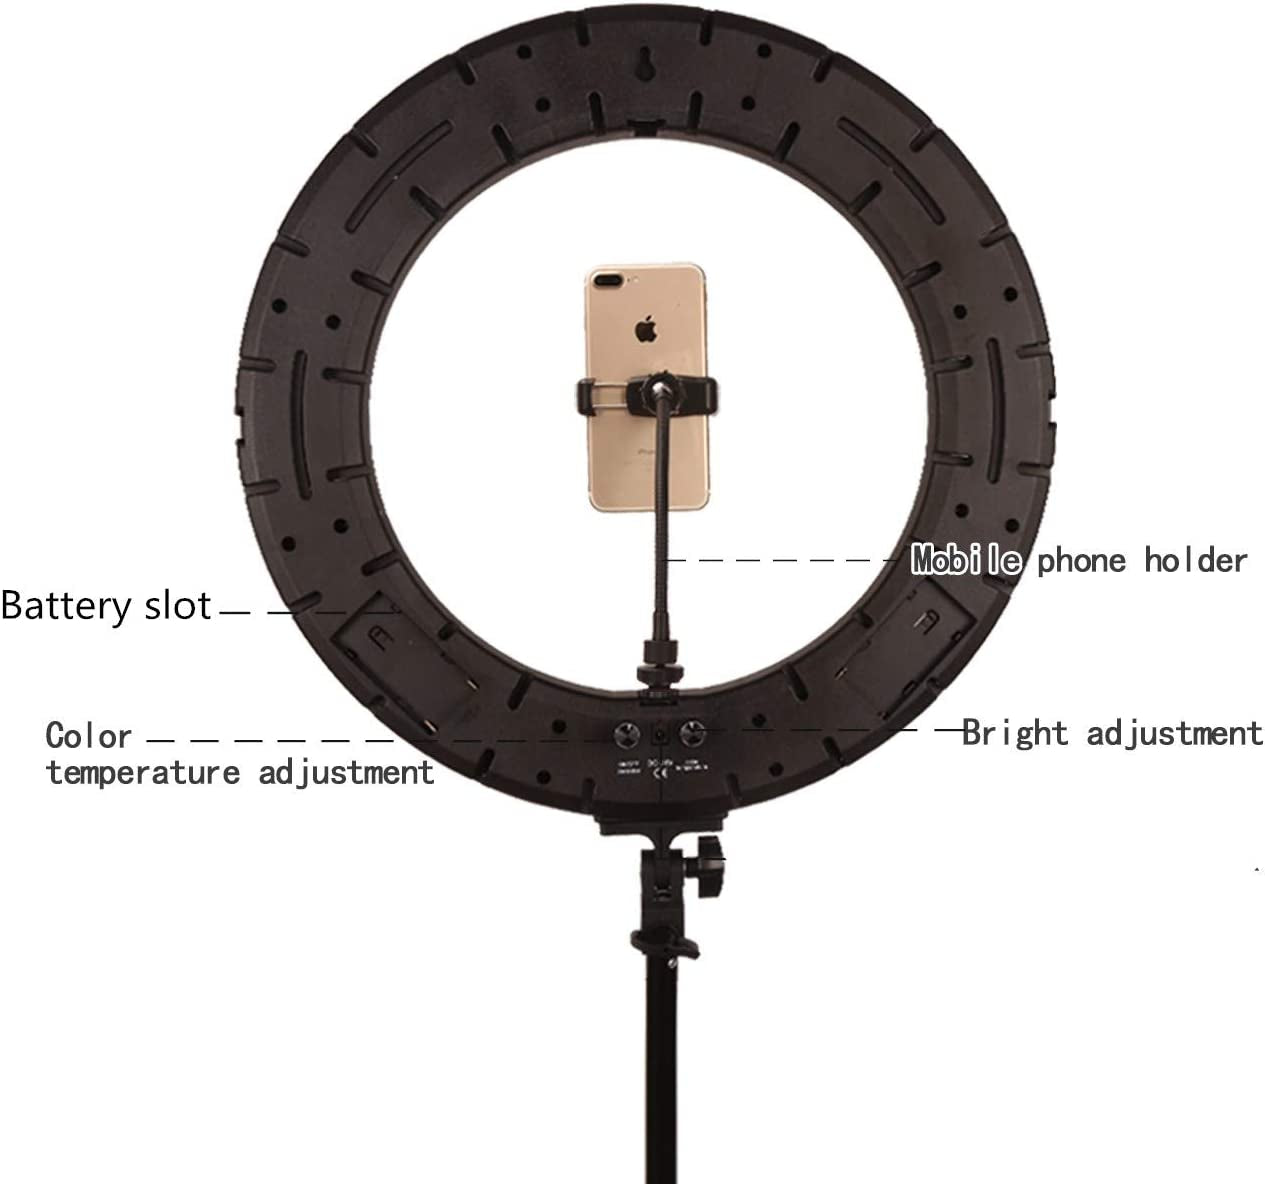 18" 60W Dimmable 3200-5600K LED Ring Light, Photography Lighting Makeup Selfie Beauty Lighting Eyebrow Tattoo Lamp Studio Video Shooting Circle Light Kit with Stand,Mirror,Carrying Bag